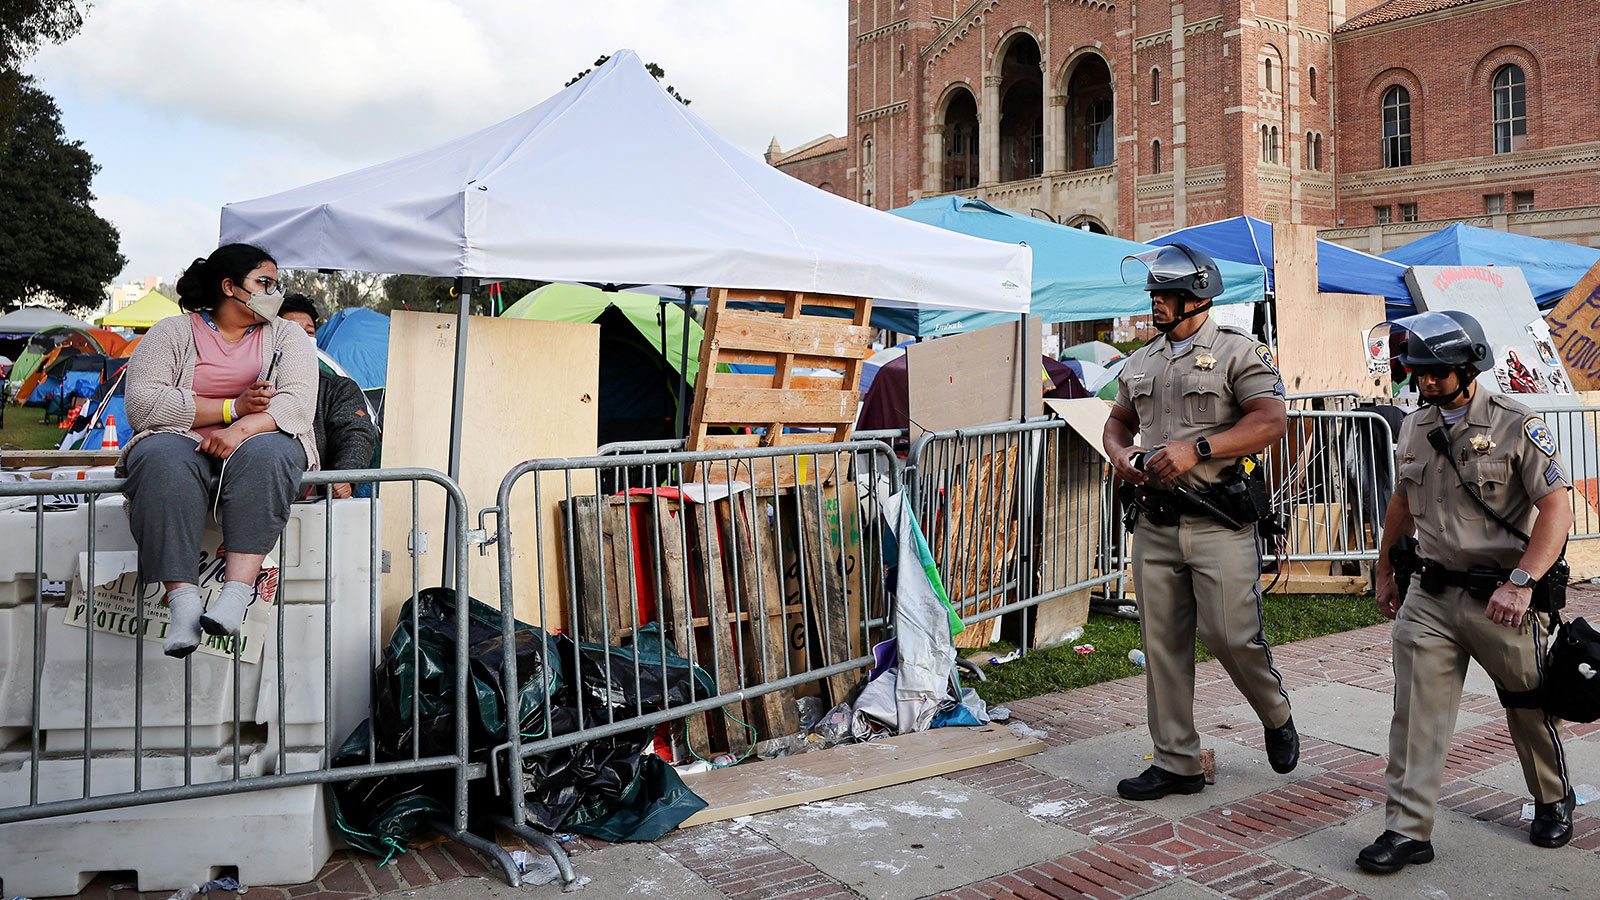 California Highway Patrol officers patrol near an encampment at the University of California Los Angeles campus on May 1.